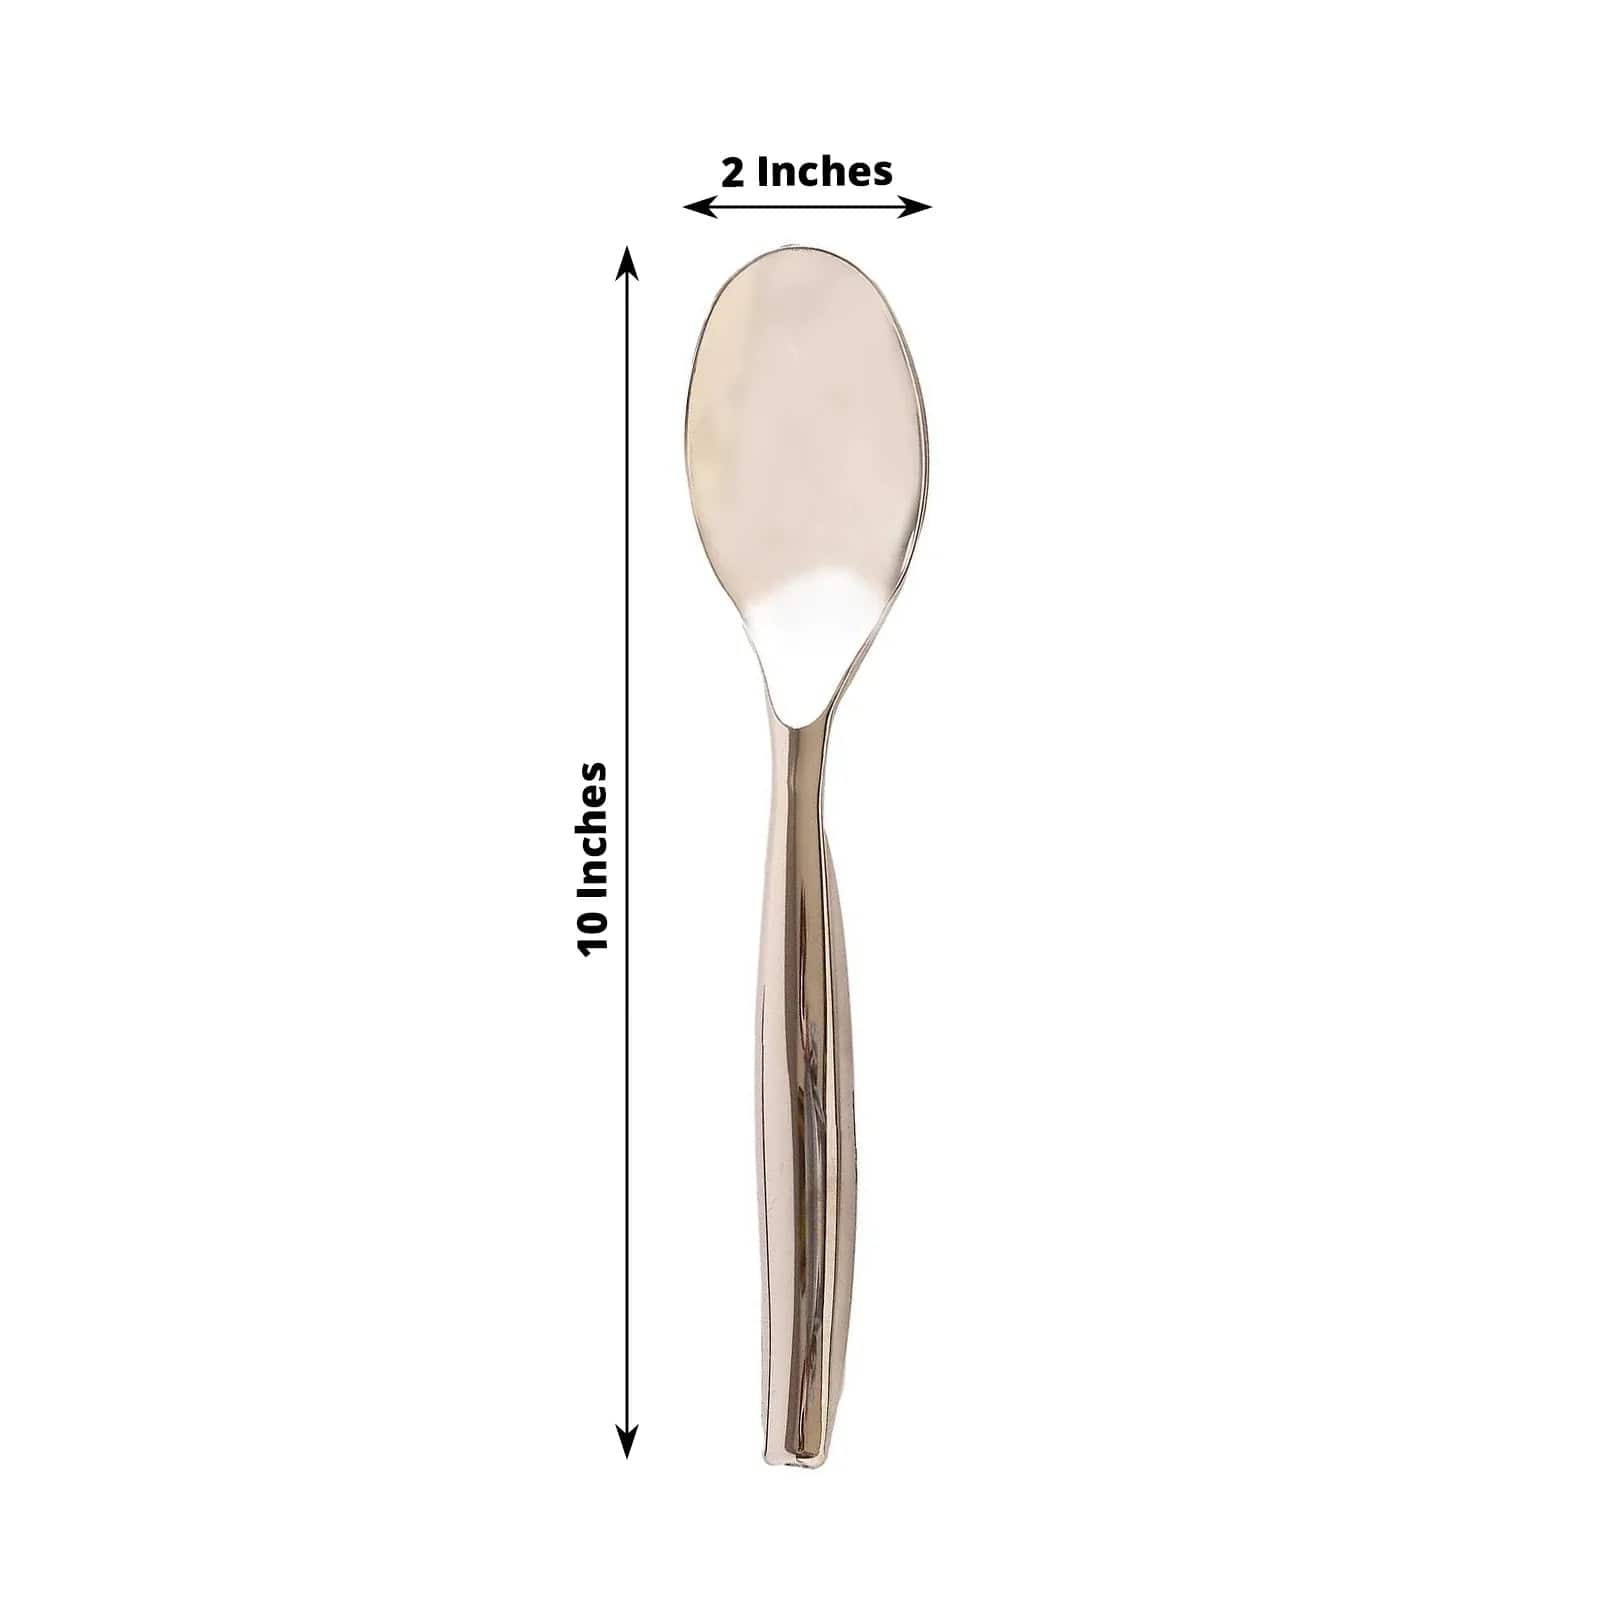 10 Silver Disposable Heavy Duty Plastic Serving Spoons